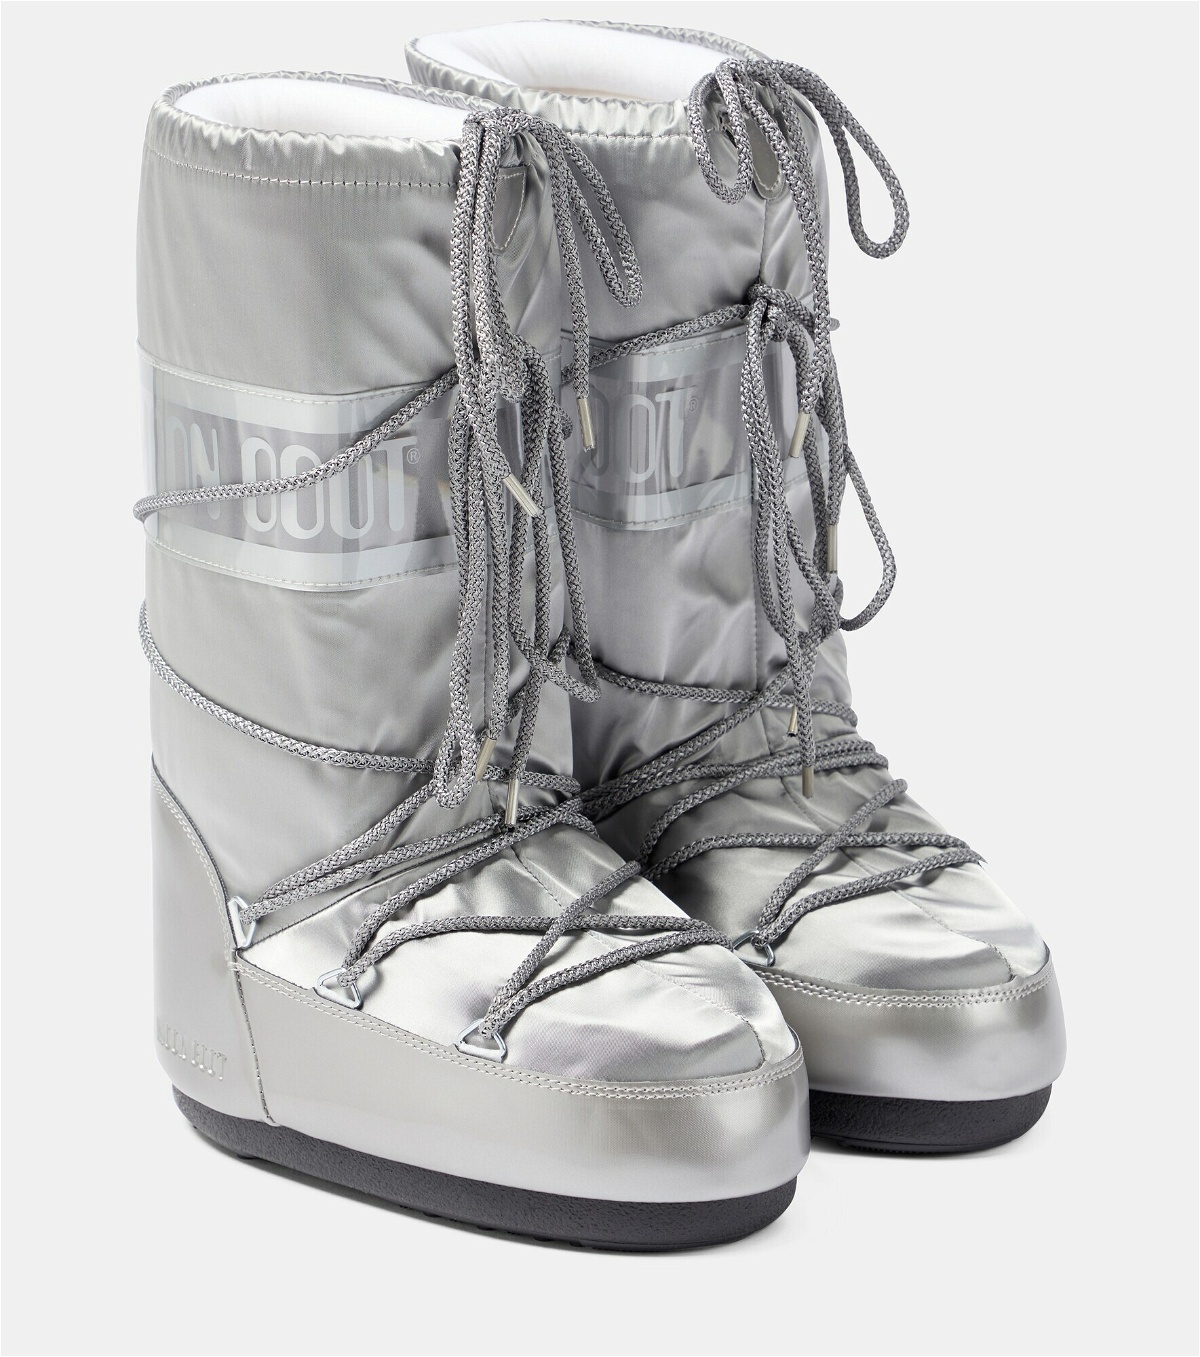 Moon Boot Icon Glance Low Snow Boots - Grey